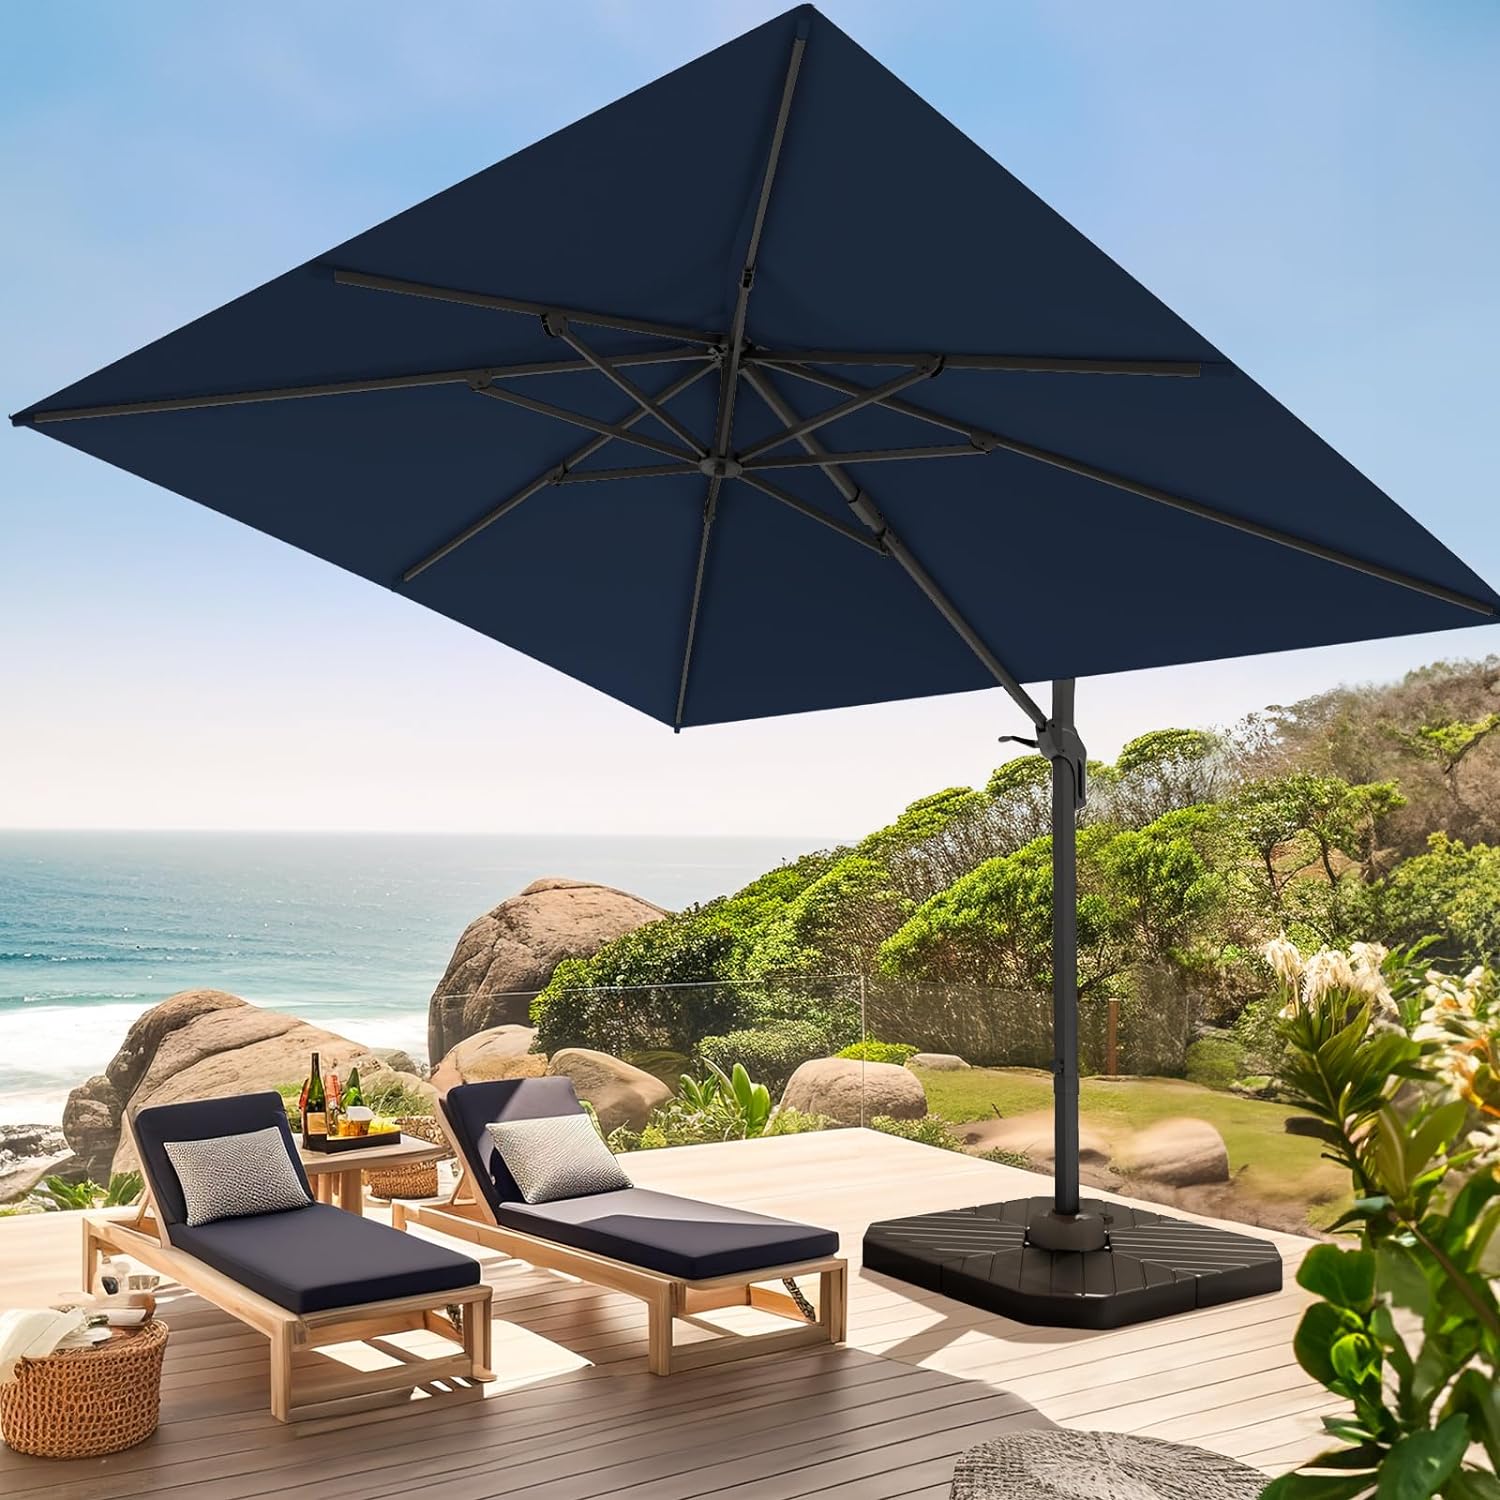 wikiwiki 10x10FT Cantilever Patio Umbrella Outdoor Offset Square Umbrella w/ 36 Month Fade Resistance Recycled Fabric, 6-Level 360Rotation Aluminum Pole for Deck Pool, Navy Blue